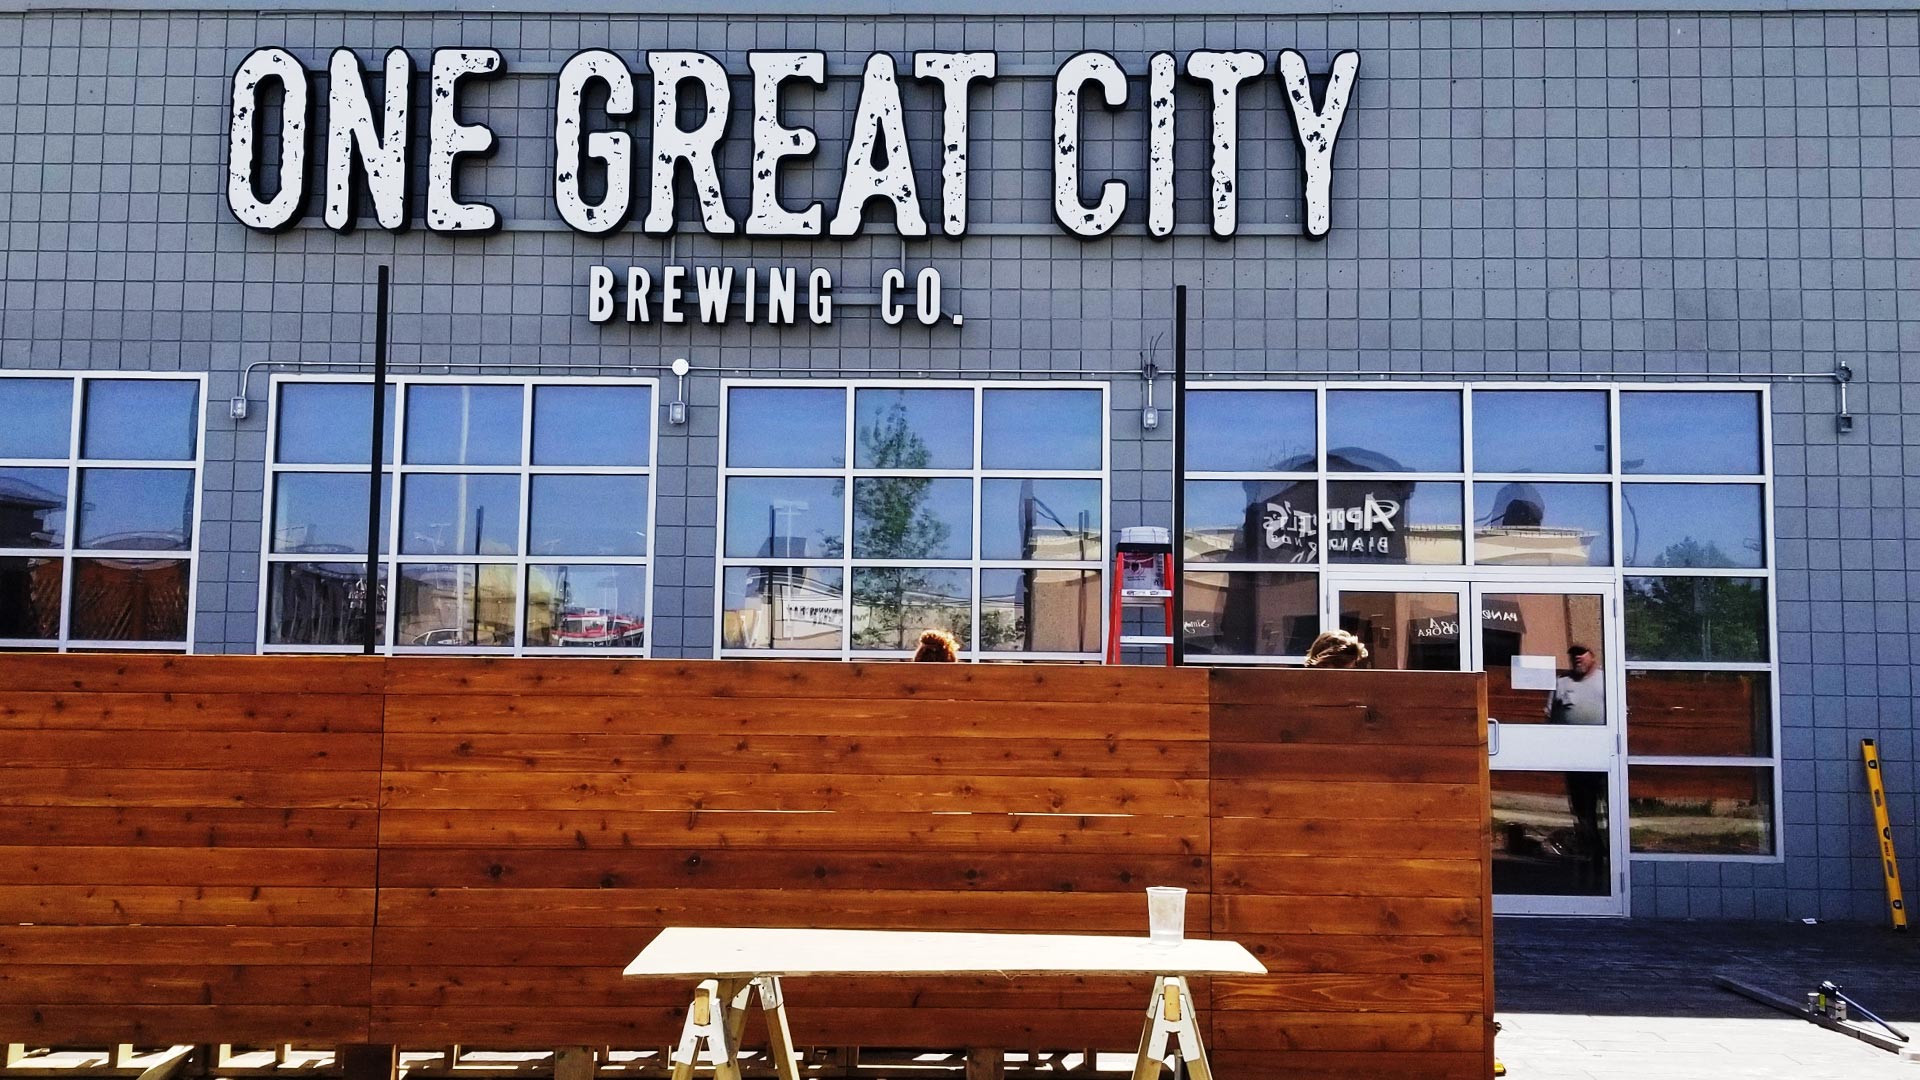 IET One Great City Brewing